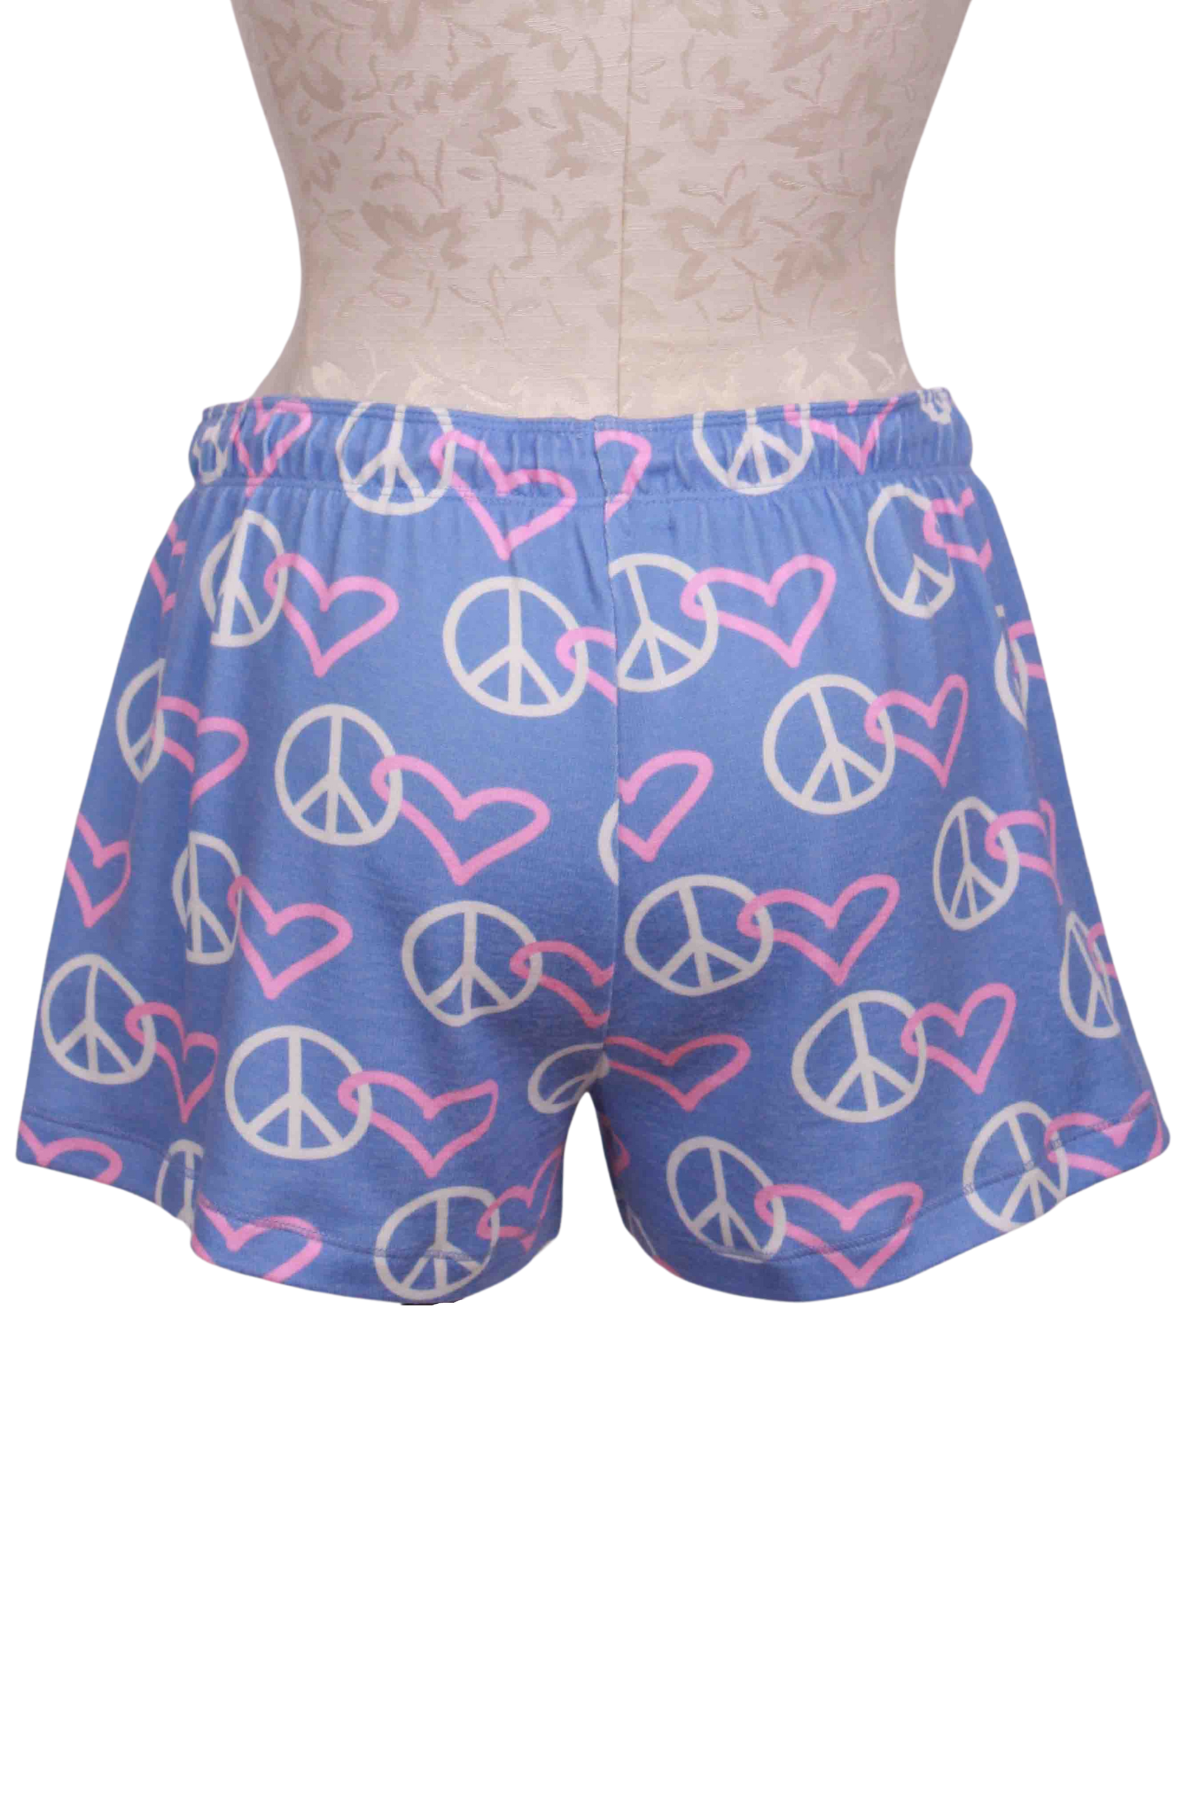 back view of Peace Love Shorts by PJ Salvage